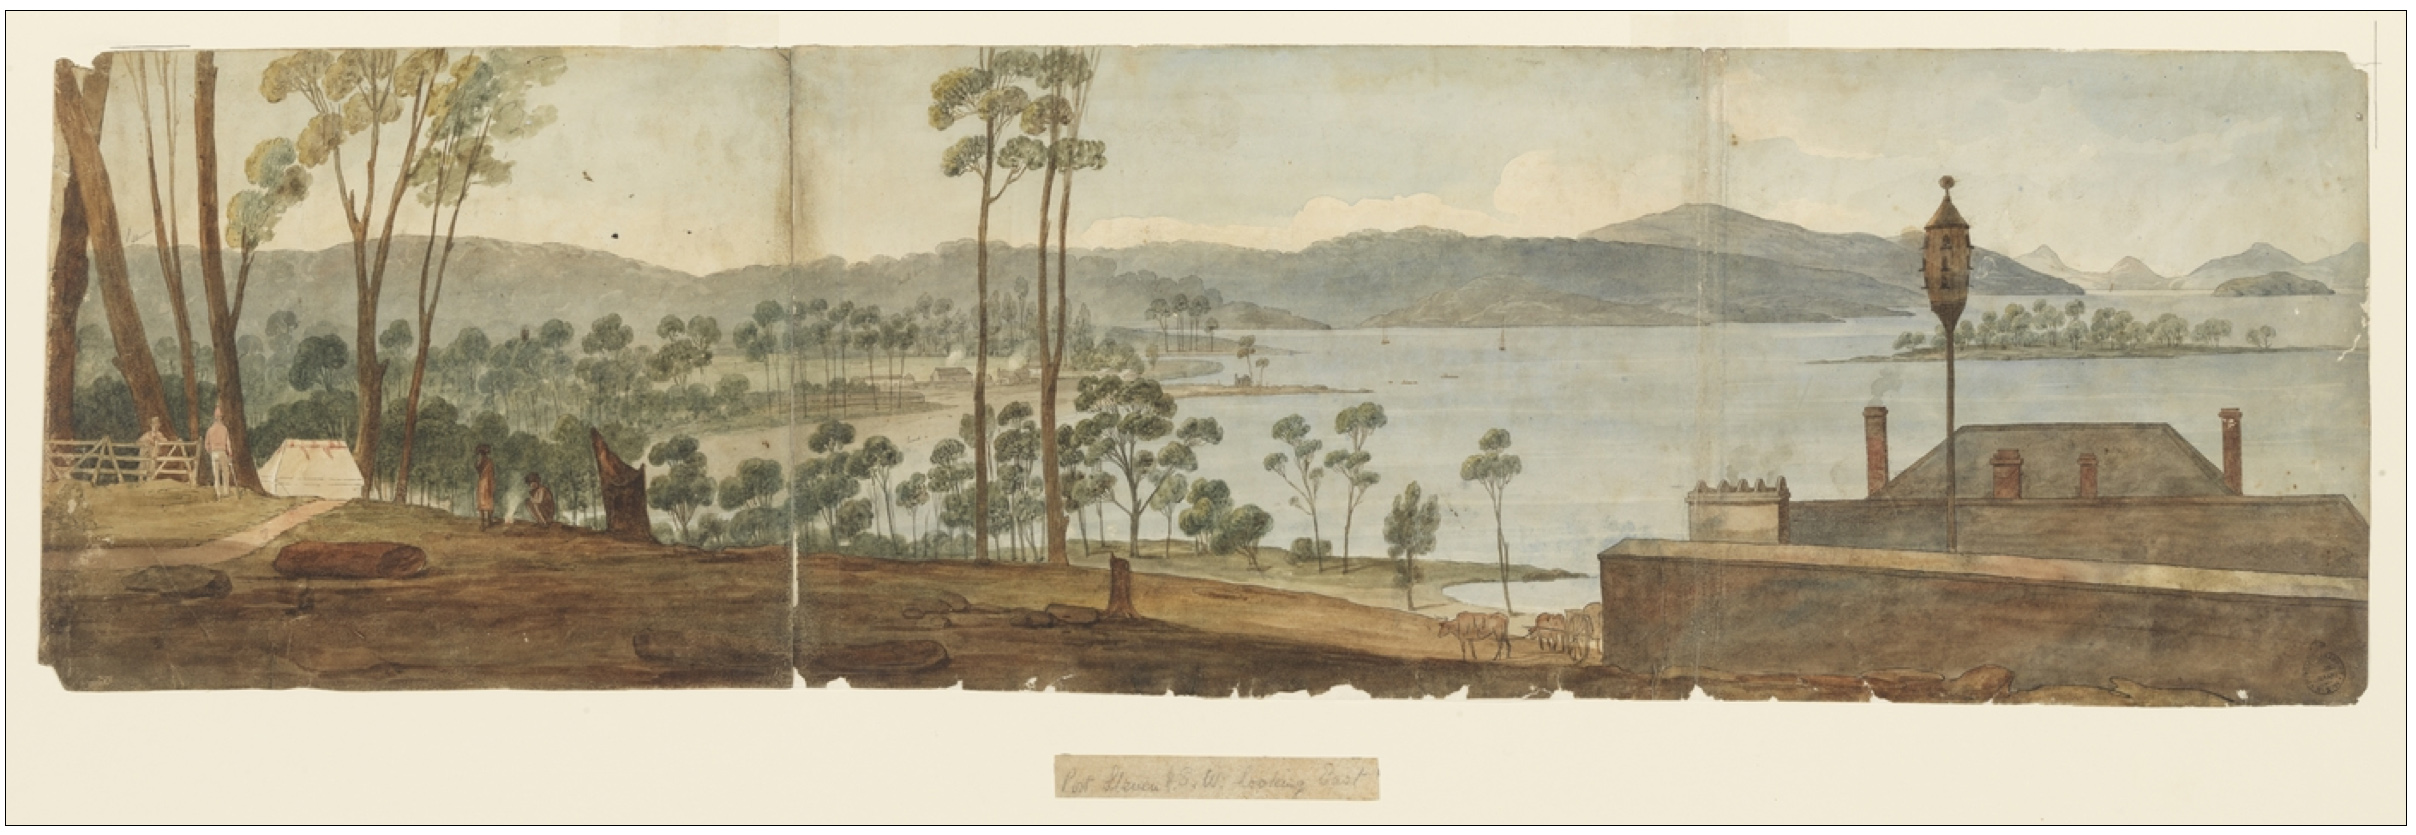 7. 'Port Stevens, New South Wales' by Augustus Earle 1825-1828 (Courtesy of State Library of NSW)